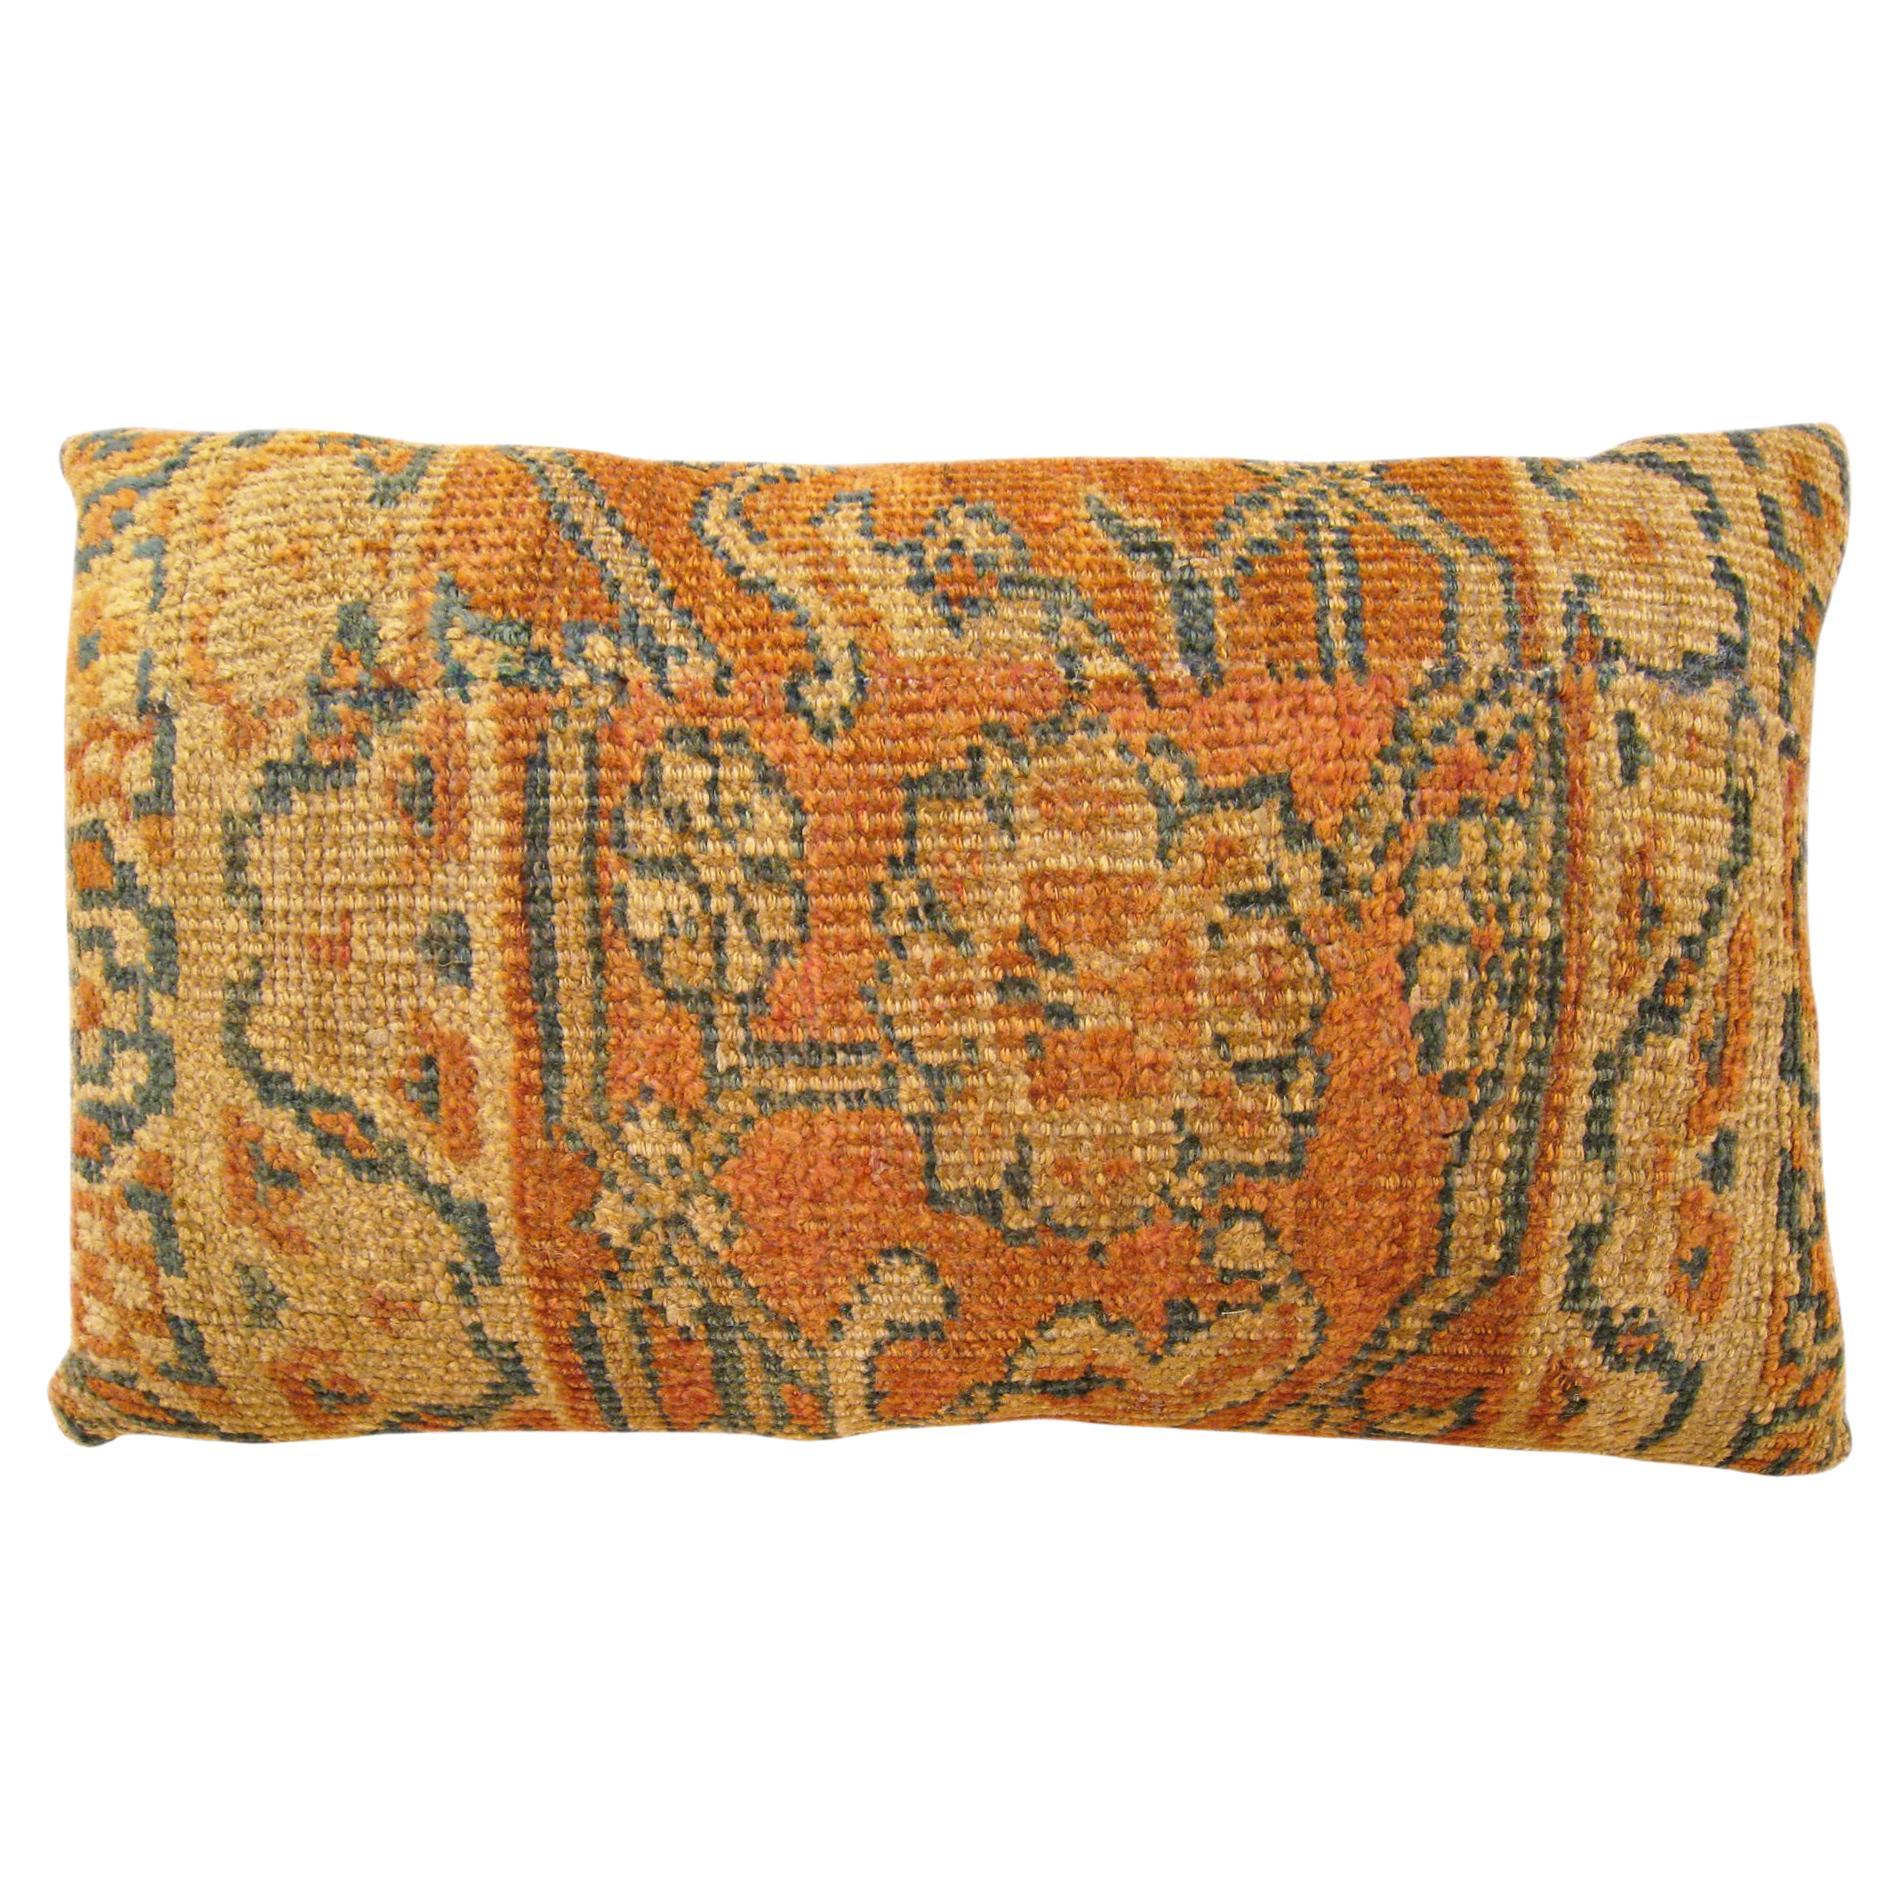 Decorative Antique Persian Sultanabad Pillow with Floral & Geometric Abstracts For Sale